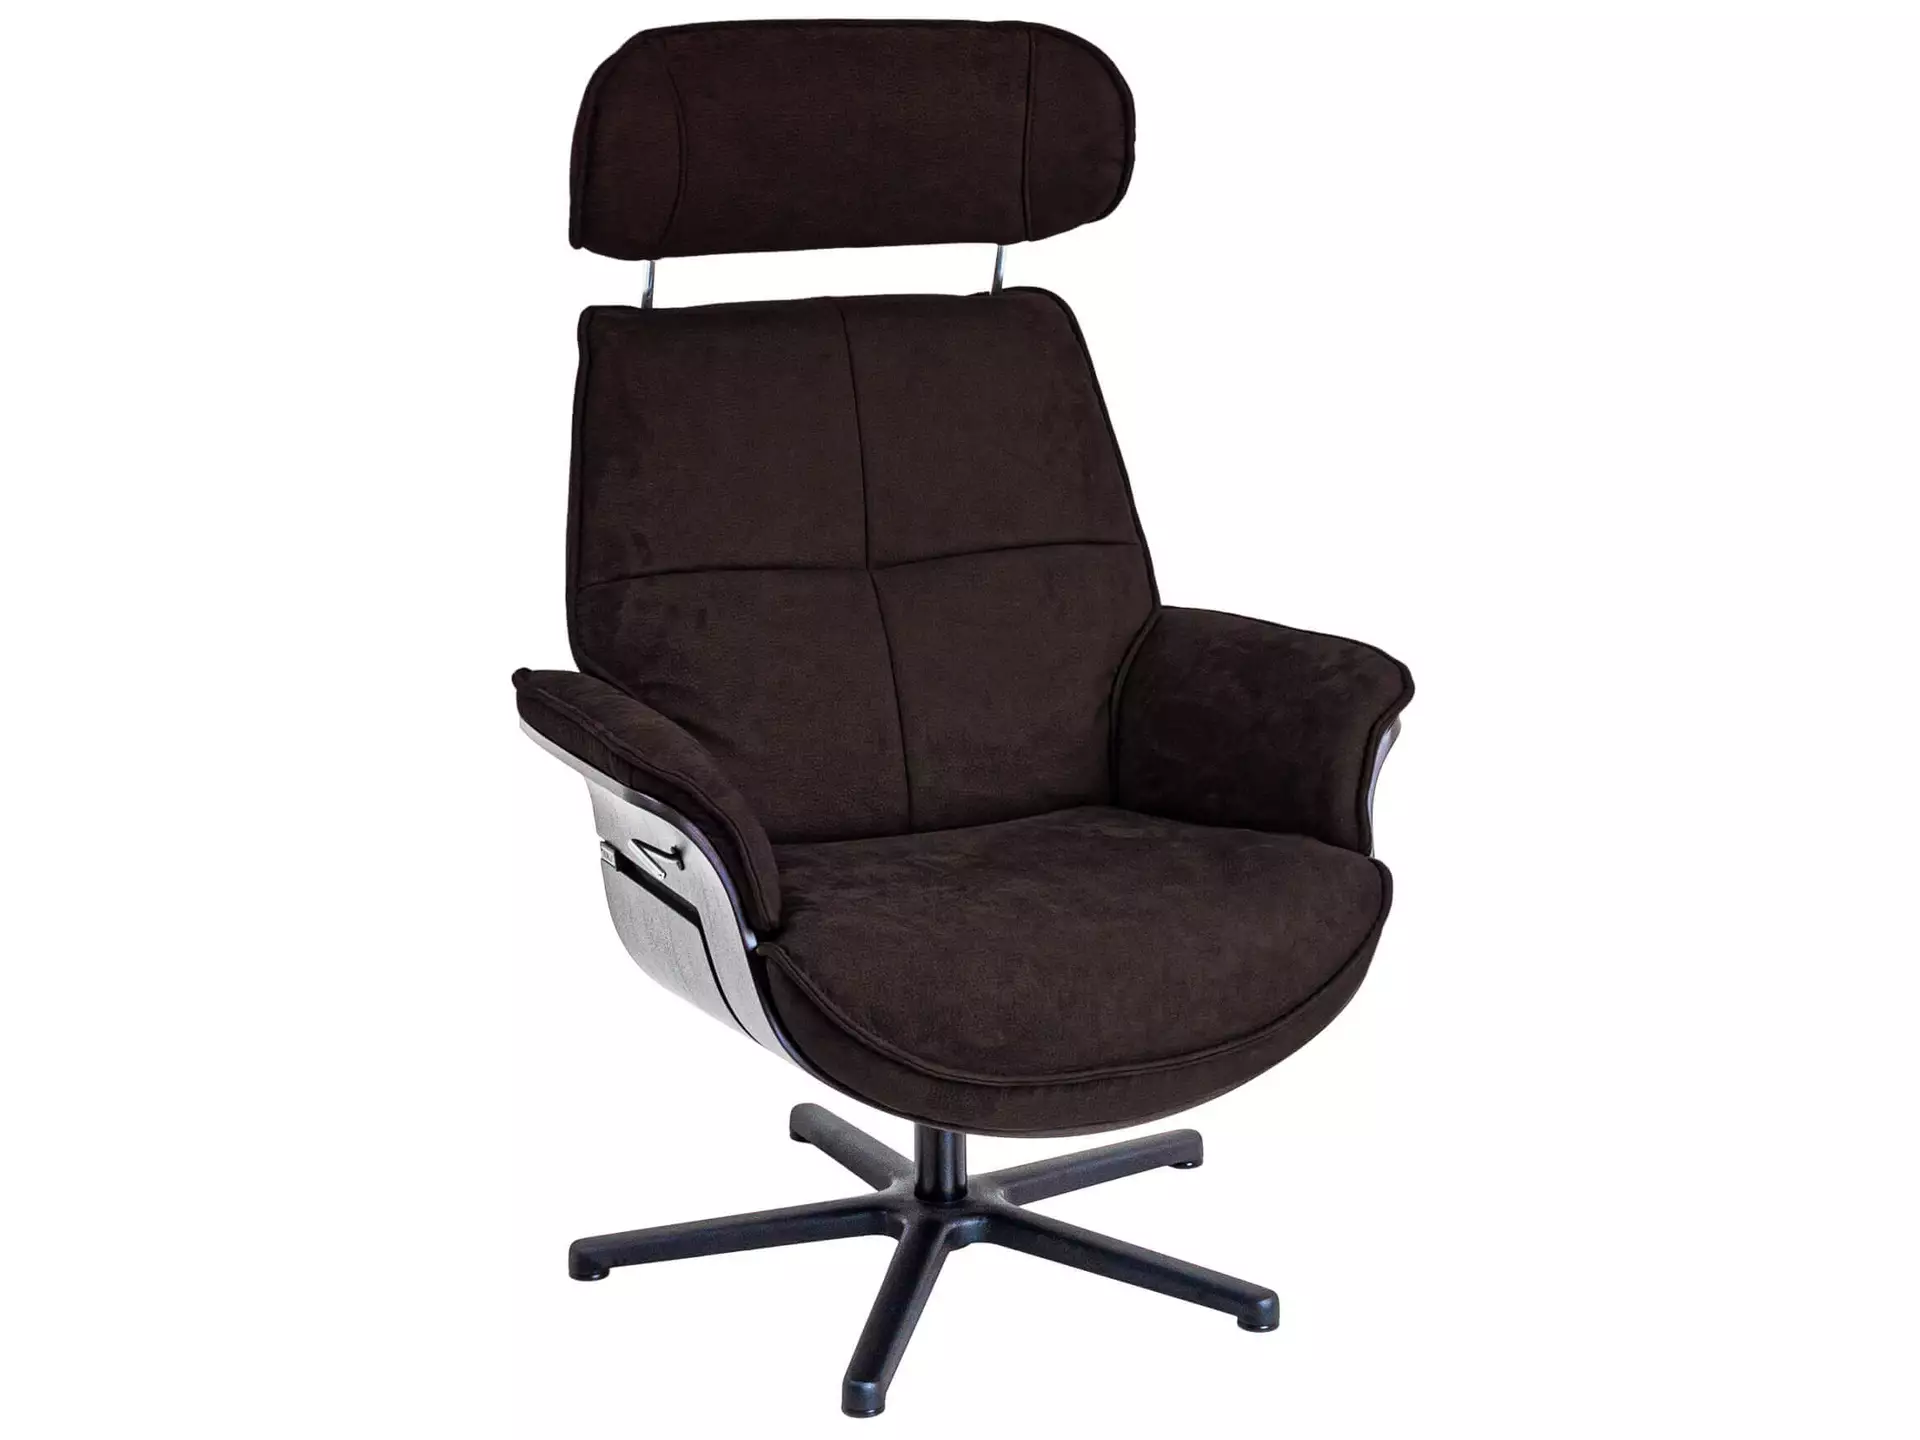 Relaxer Curacao Eiche Dunkel Basic Polipol / Farbe: Anthrazit / Material: Stoff Basic